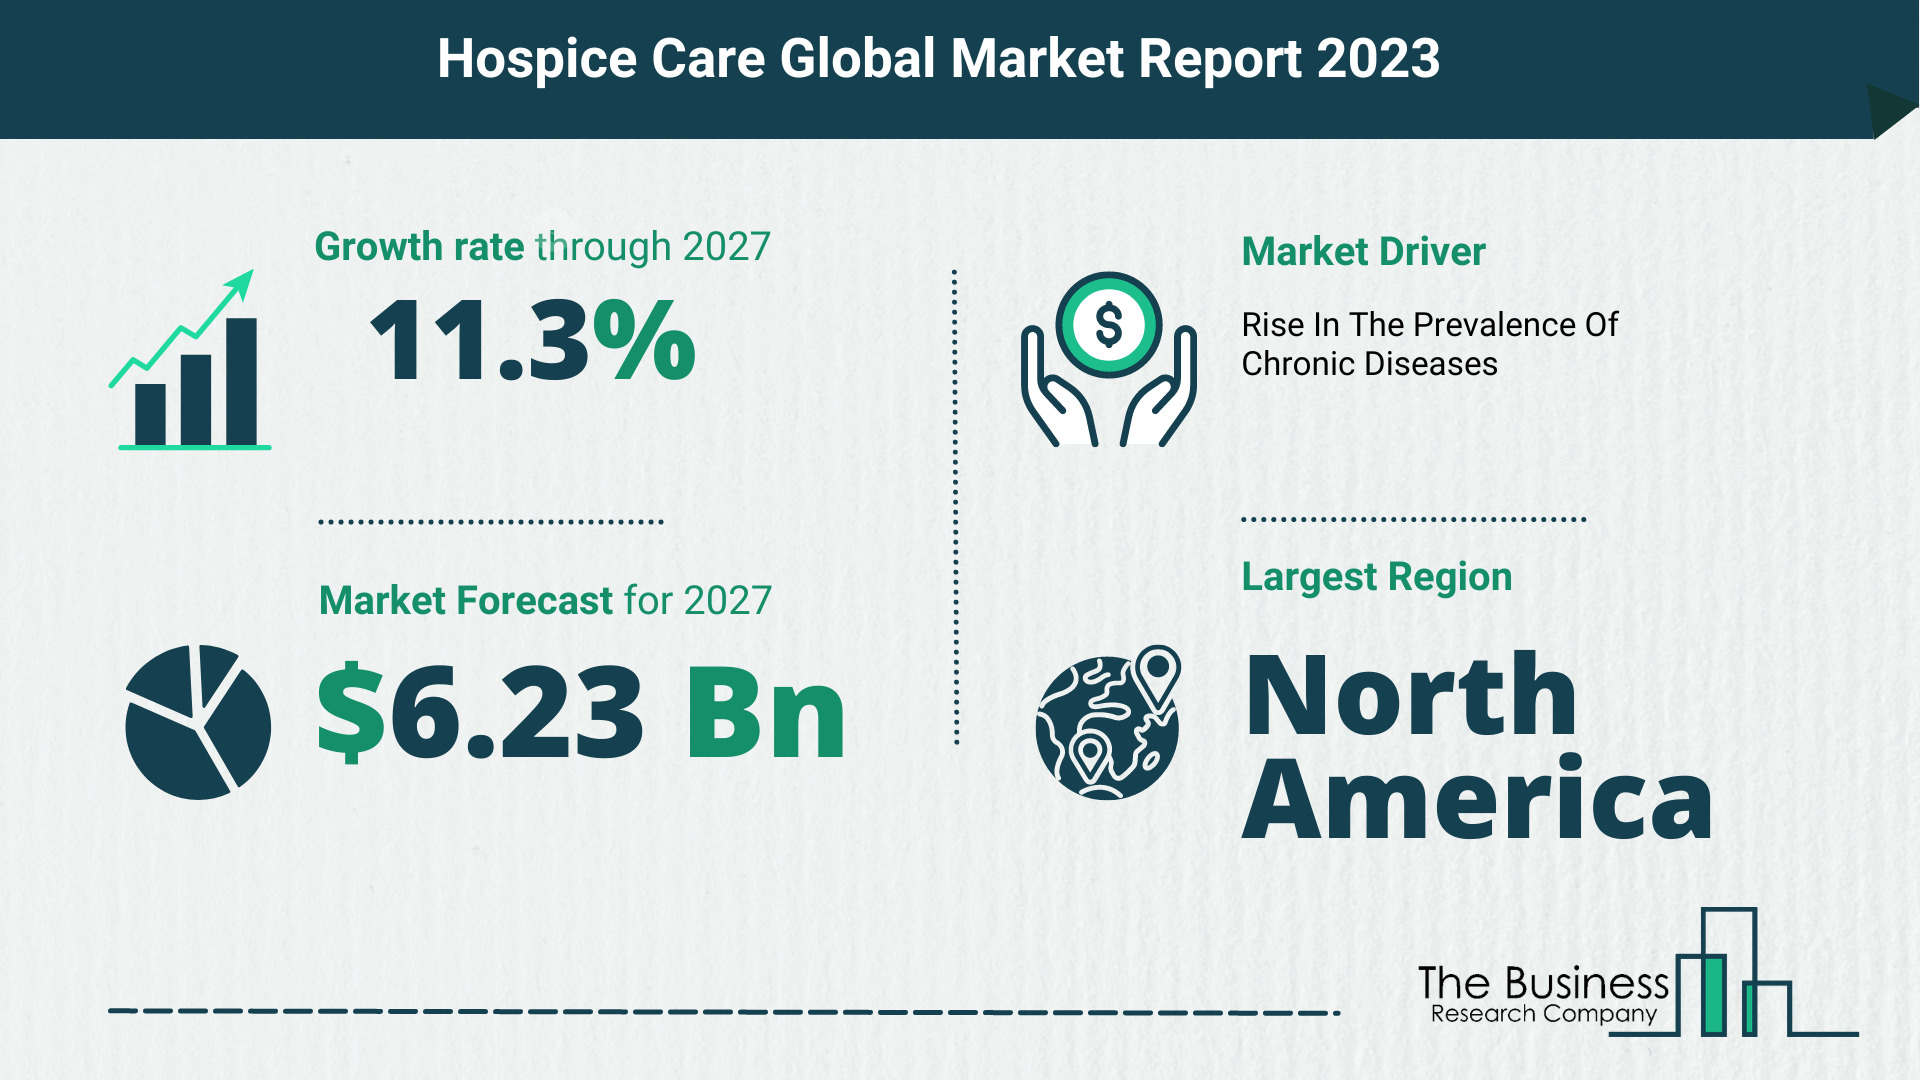 Global Hospice Care Market Opportunities And Strategies 2023